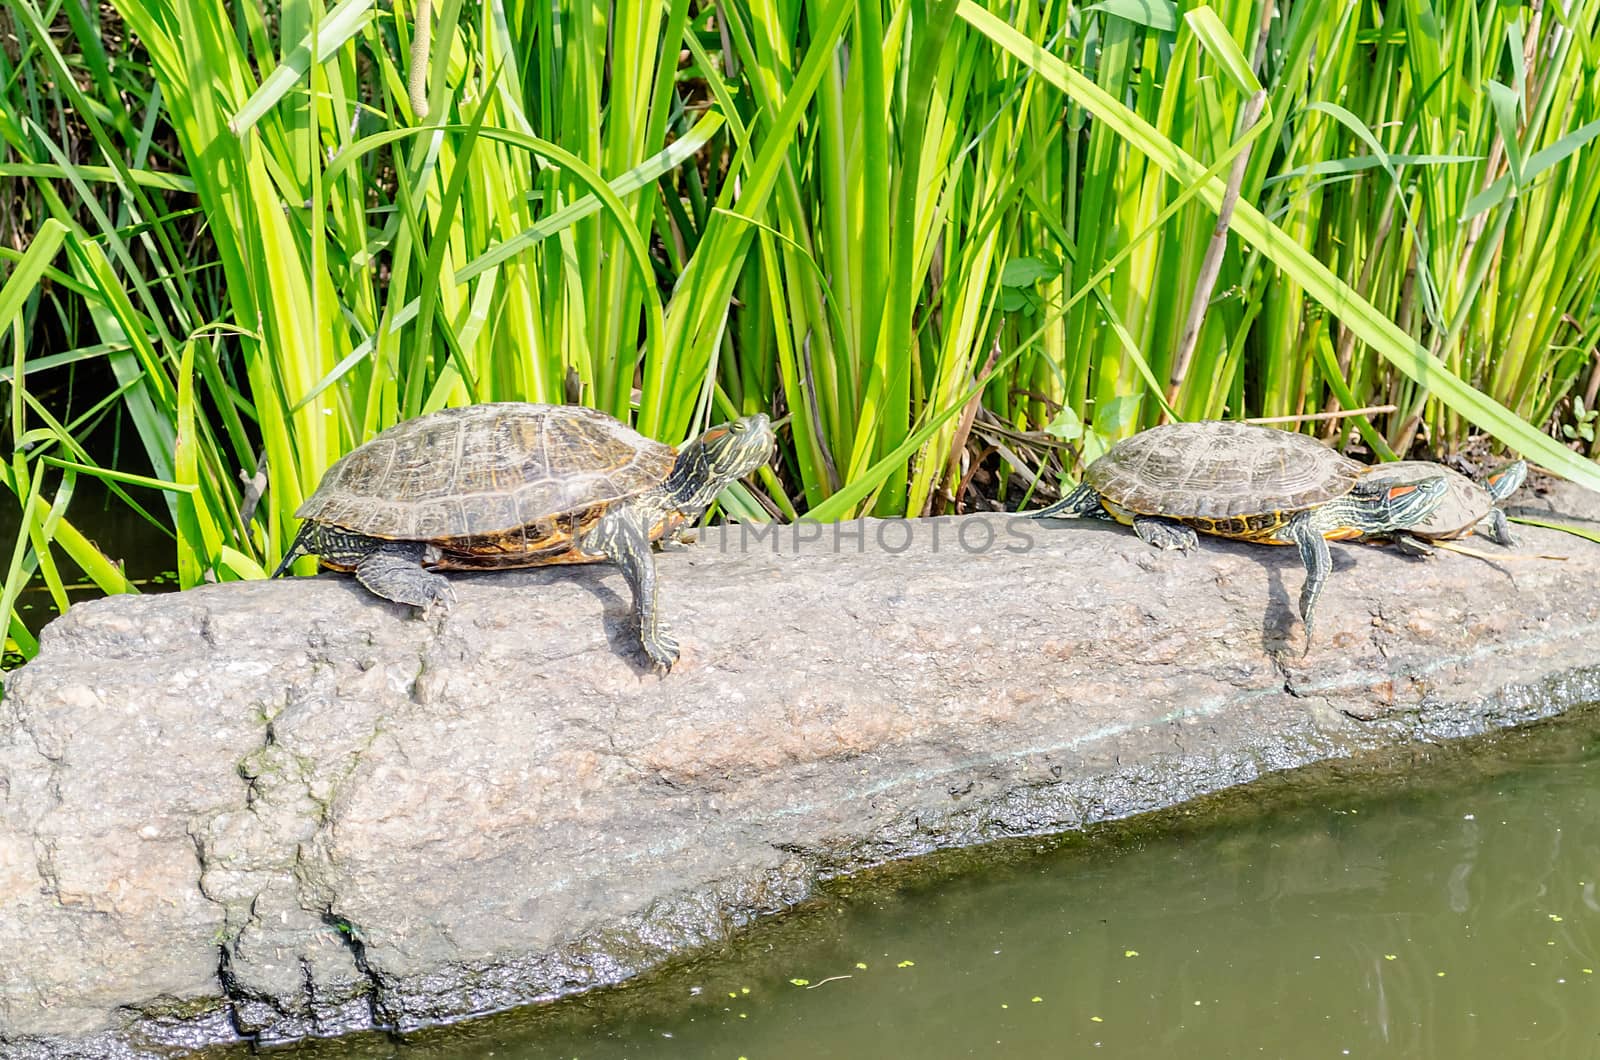 Turtles on the rocks, Central Park, New York by marcorubino